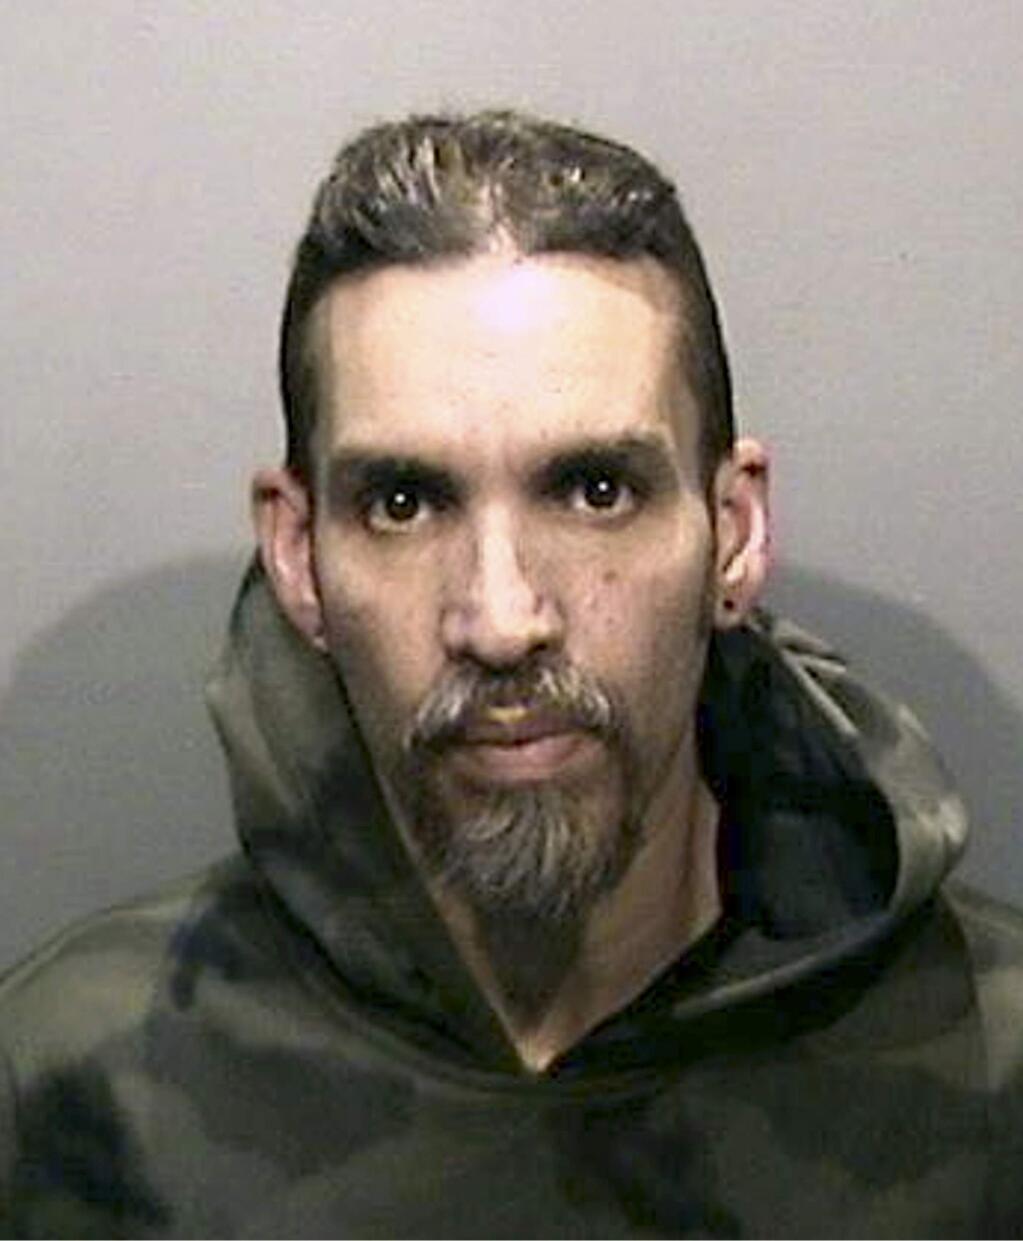 FILE - This Monday, June 5, 2017, file photo released by the Alameda County Sheriff's Office shows Derick Almena at Santa Rita Jail in Alameda County, Calif. Almena and Max Harris (not pictured) have pleaded not guilty to involuntary manslaughter charges in connection with a fire in an illegally converted Northern California warehouse that killed 36 people. Both entered pleas Tuesday, Sept. 26, 2017 to 36 counts of involuntary manslaughter each. Prosecutors say the two men turned the warehouse into a deathtrap when they illegally converted it into a housing and entertainment venue. (Alameda County Sheriff's Office via AP, File)